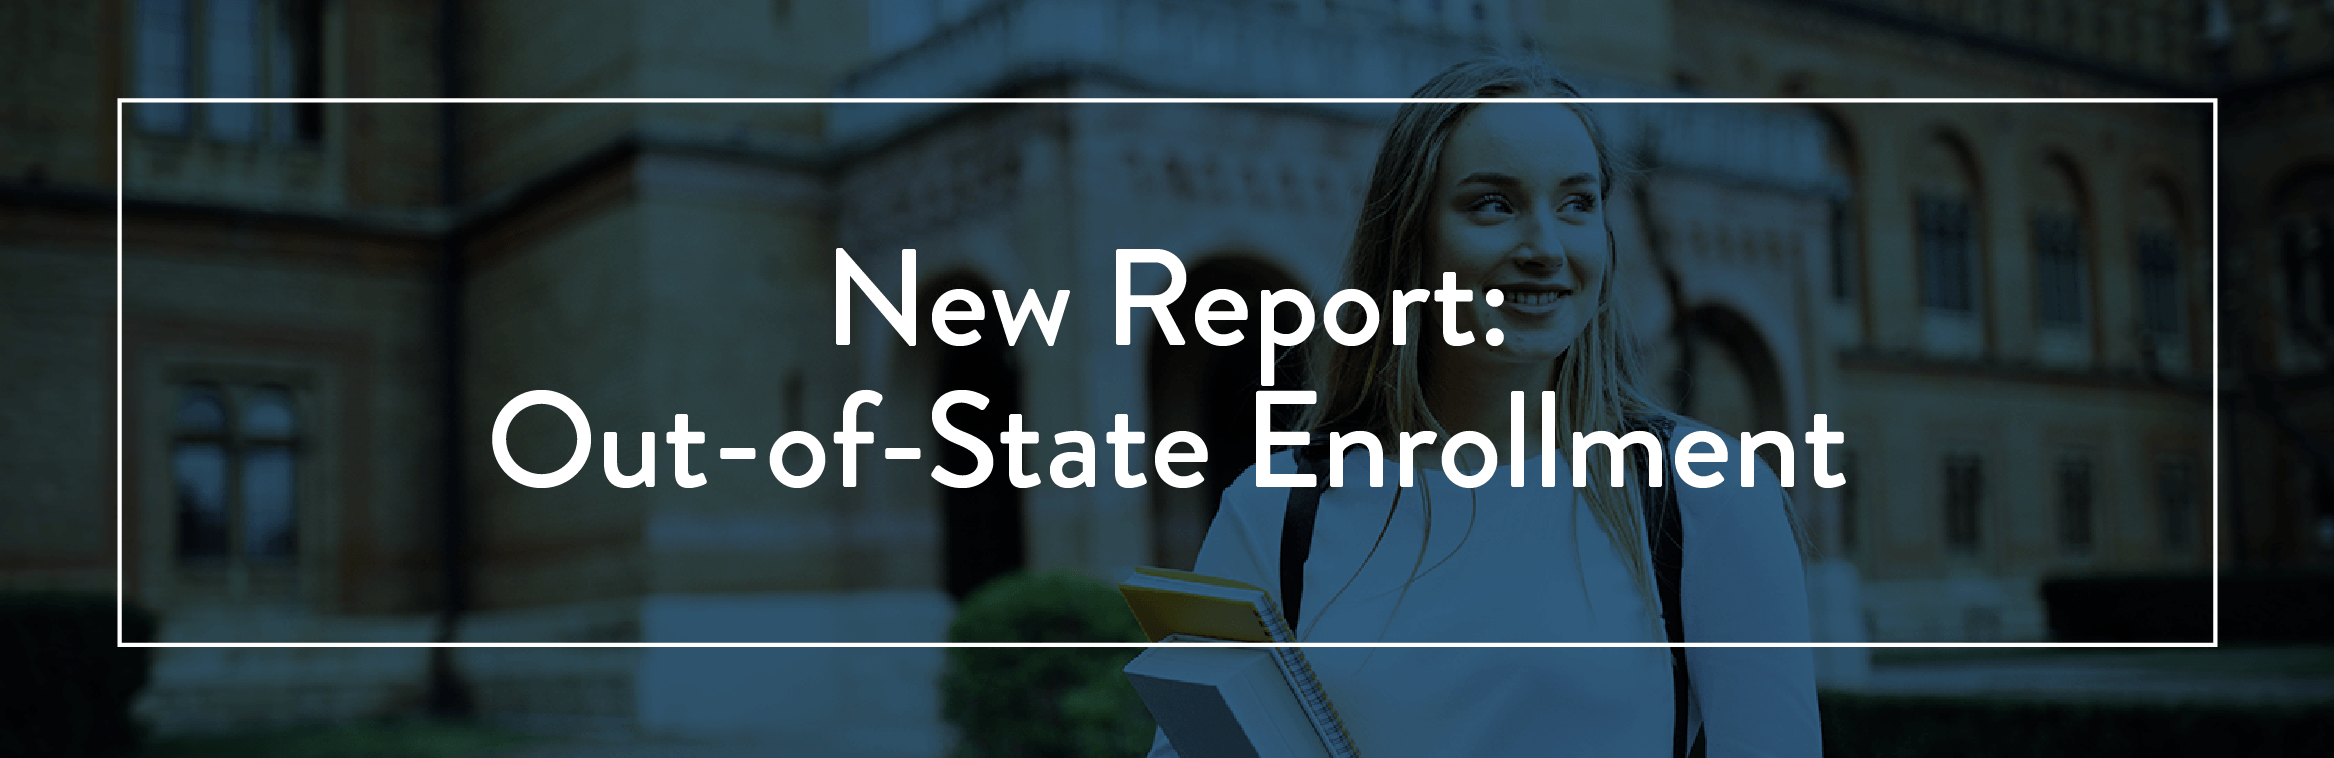 Out-of-State Enrollment report